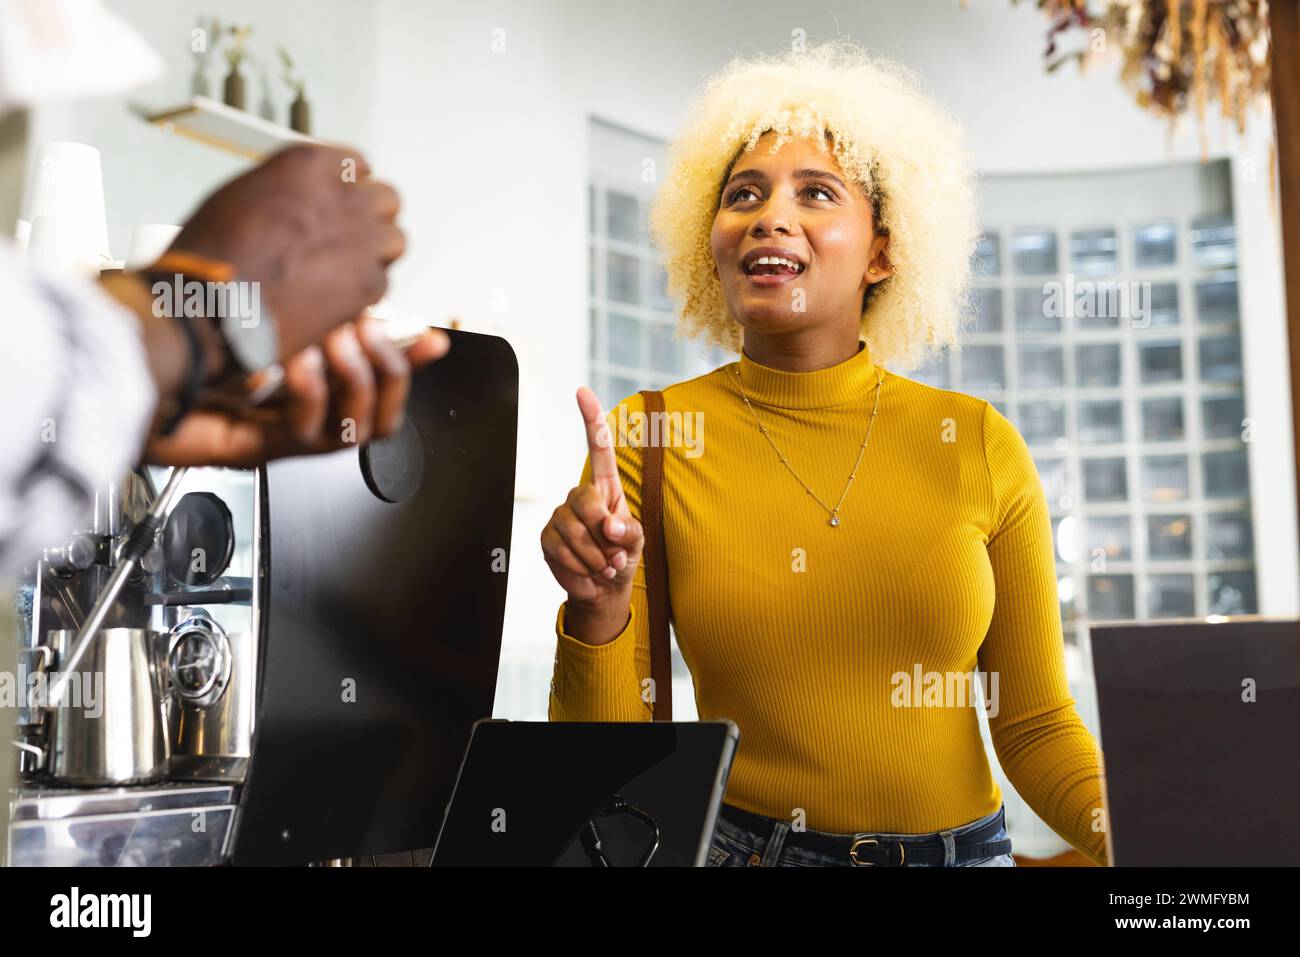 Young African American male barista and biracial woman in a lively discussion at a coffee shop Stock Photo